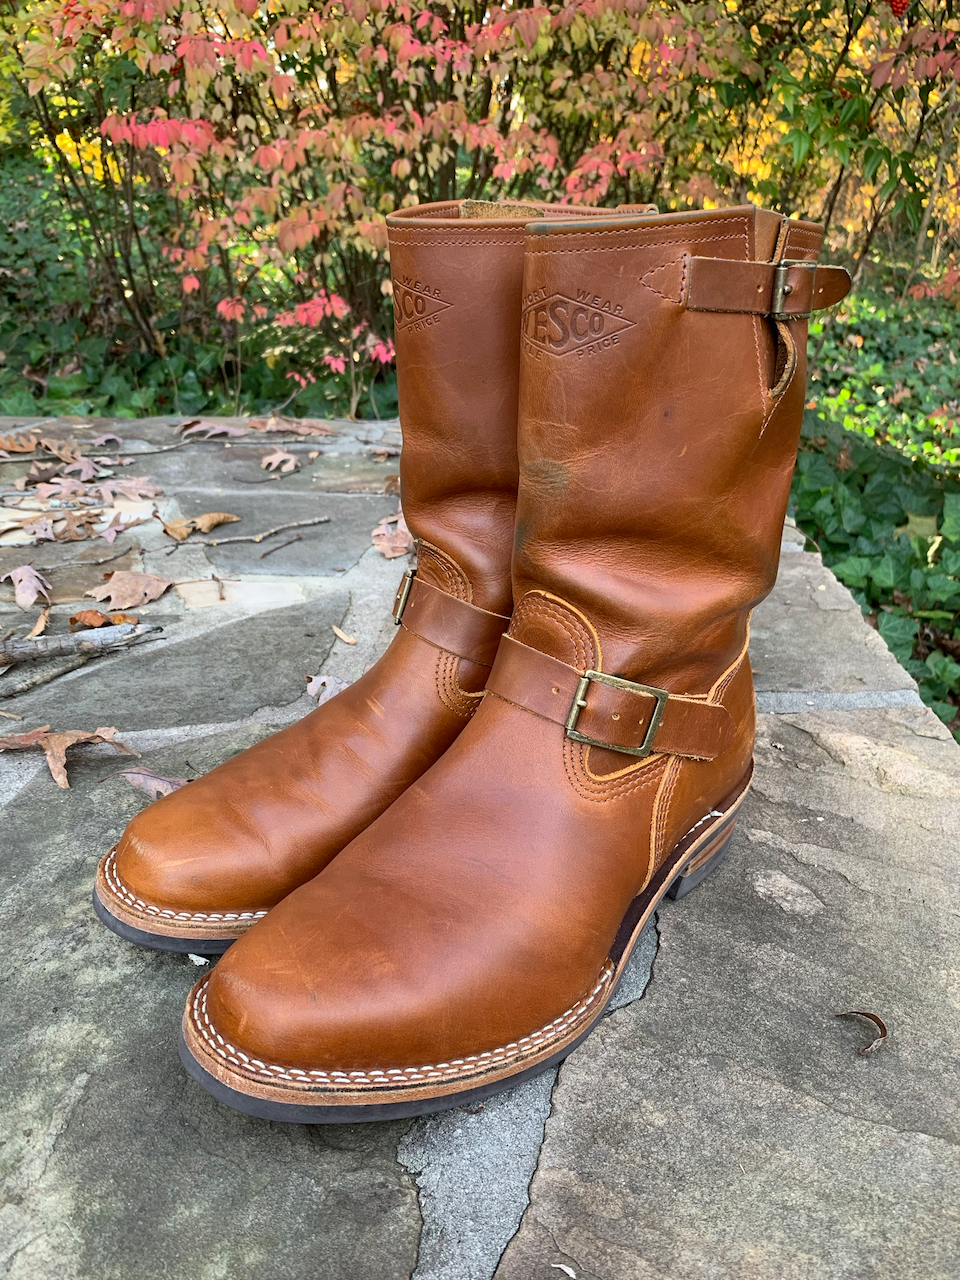 Review: Wesco 7500 Engineer Boot 